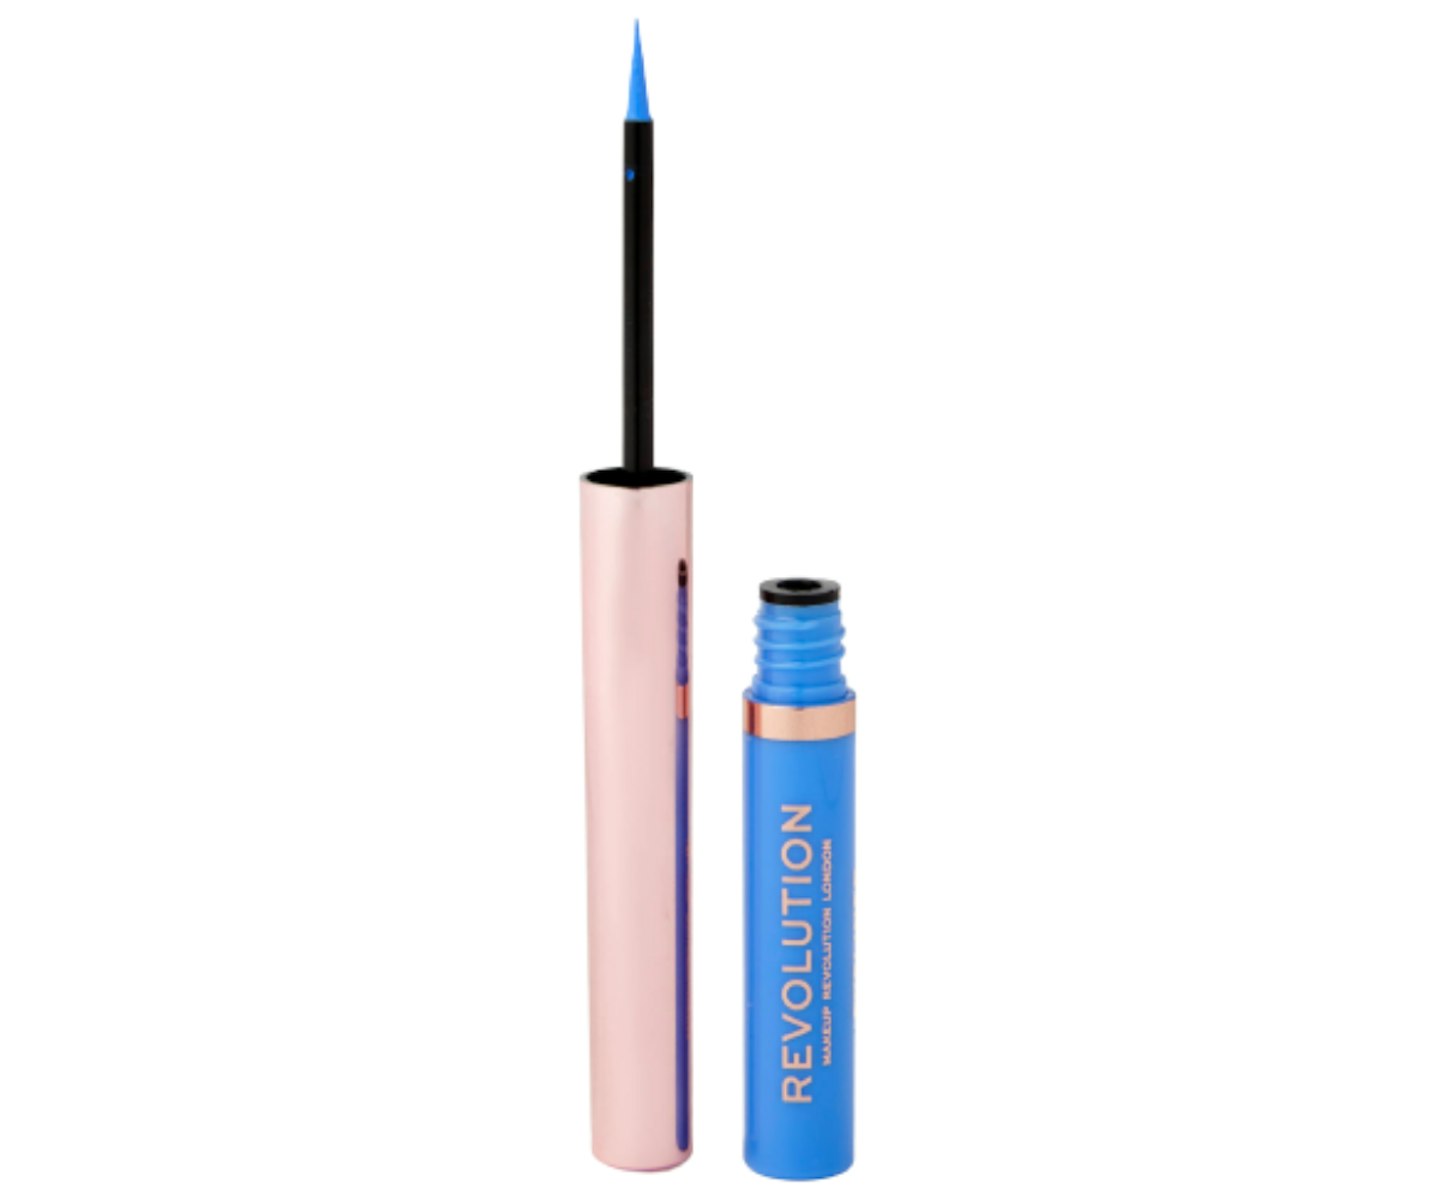 A picture of the Makeup Revolution Neon Heat Coloured Liquid Liner in Sky Blue